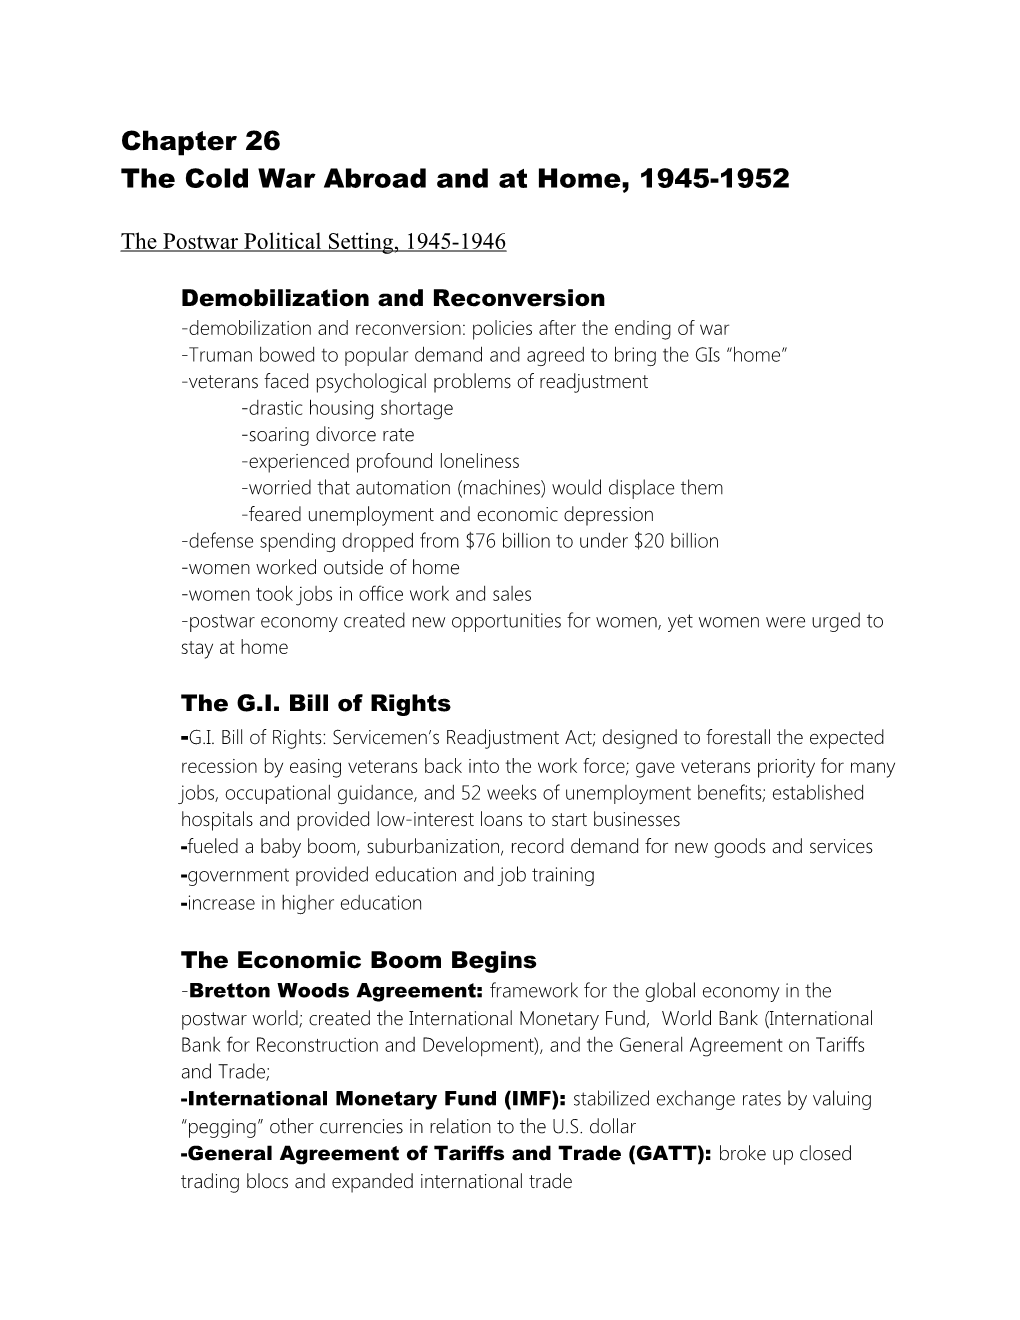 The Cold War Abroad and at Home, 1945-1952